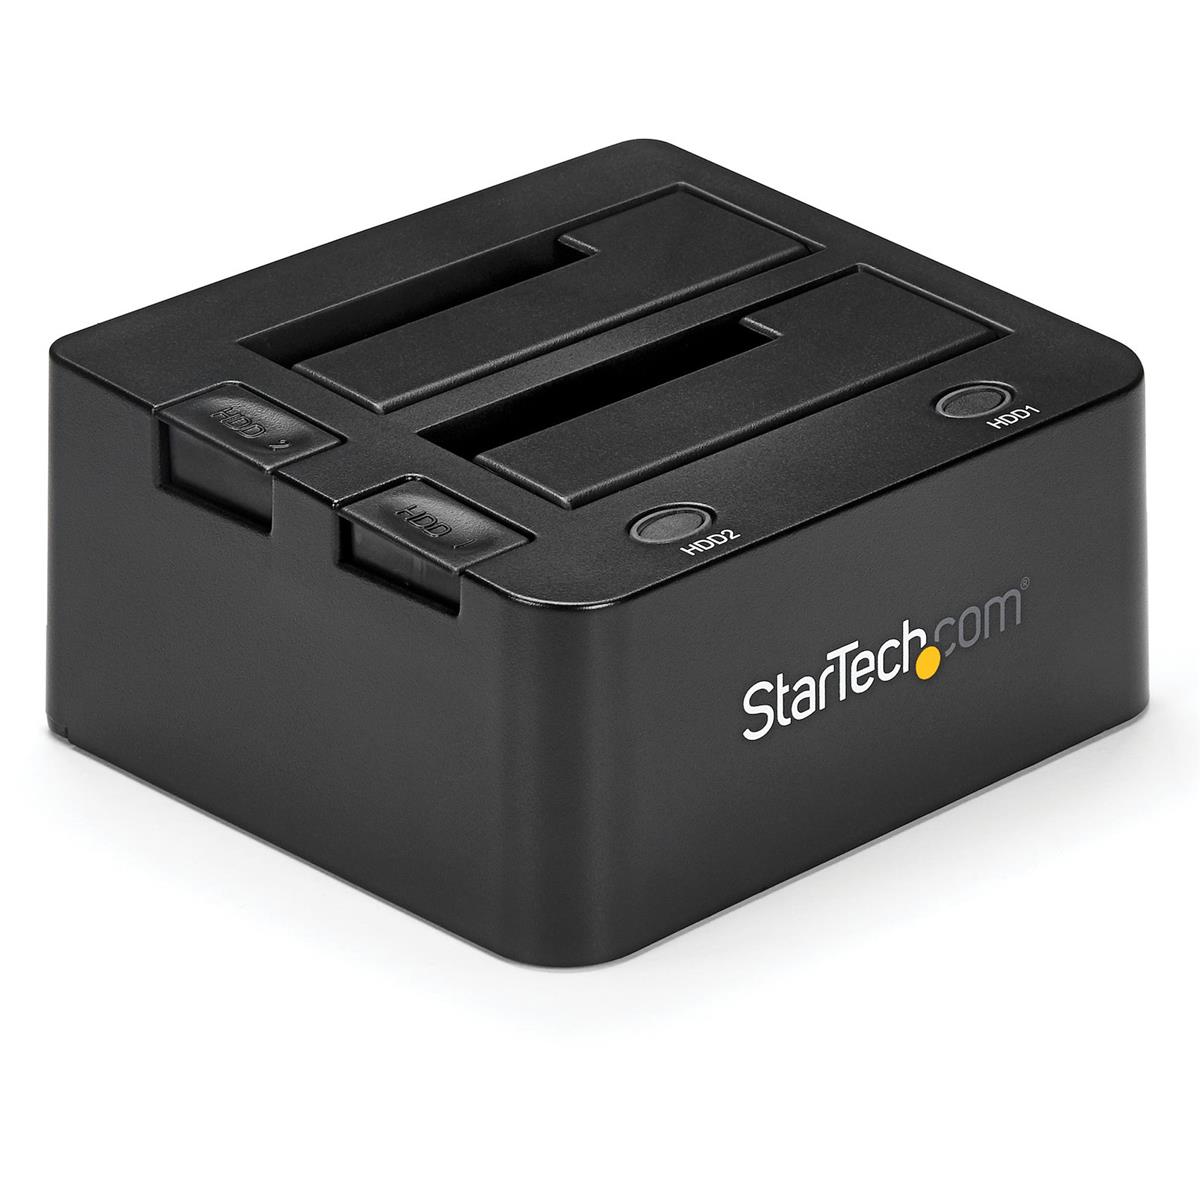 Image of StarTech USB 3.0 Dual Hard Drive Docking Station with UASP